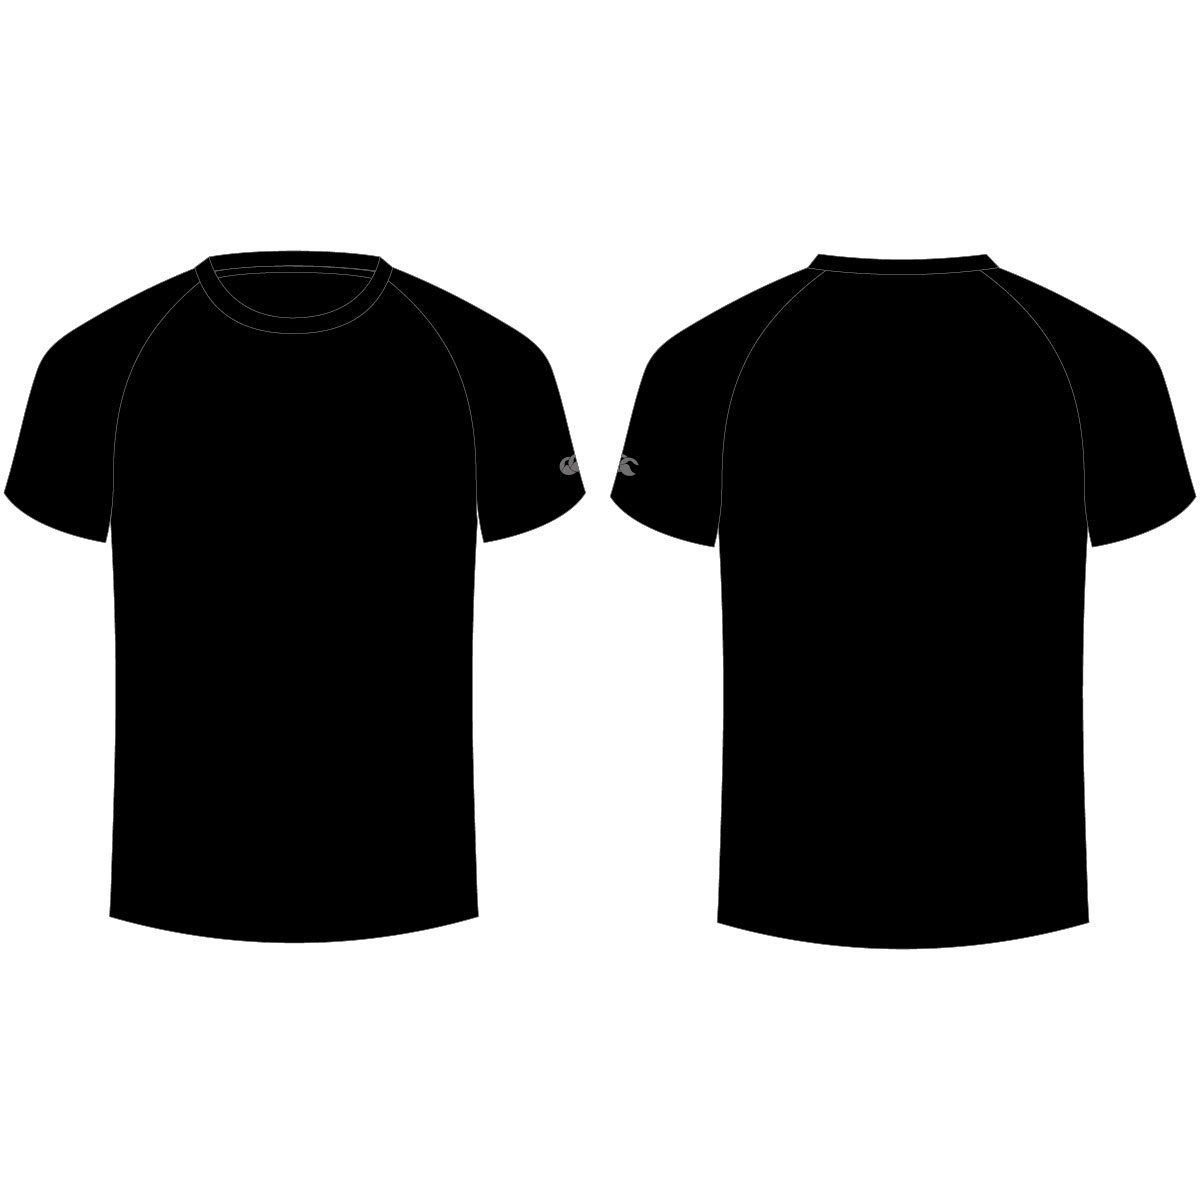 T-shirt Plain Back And Front - ClipArt Best